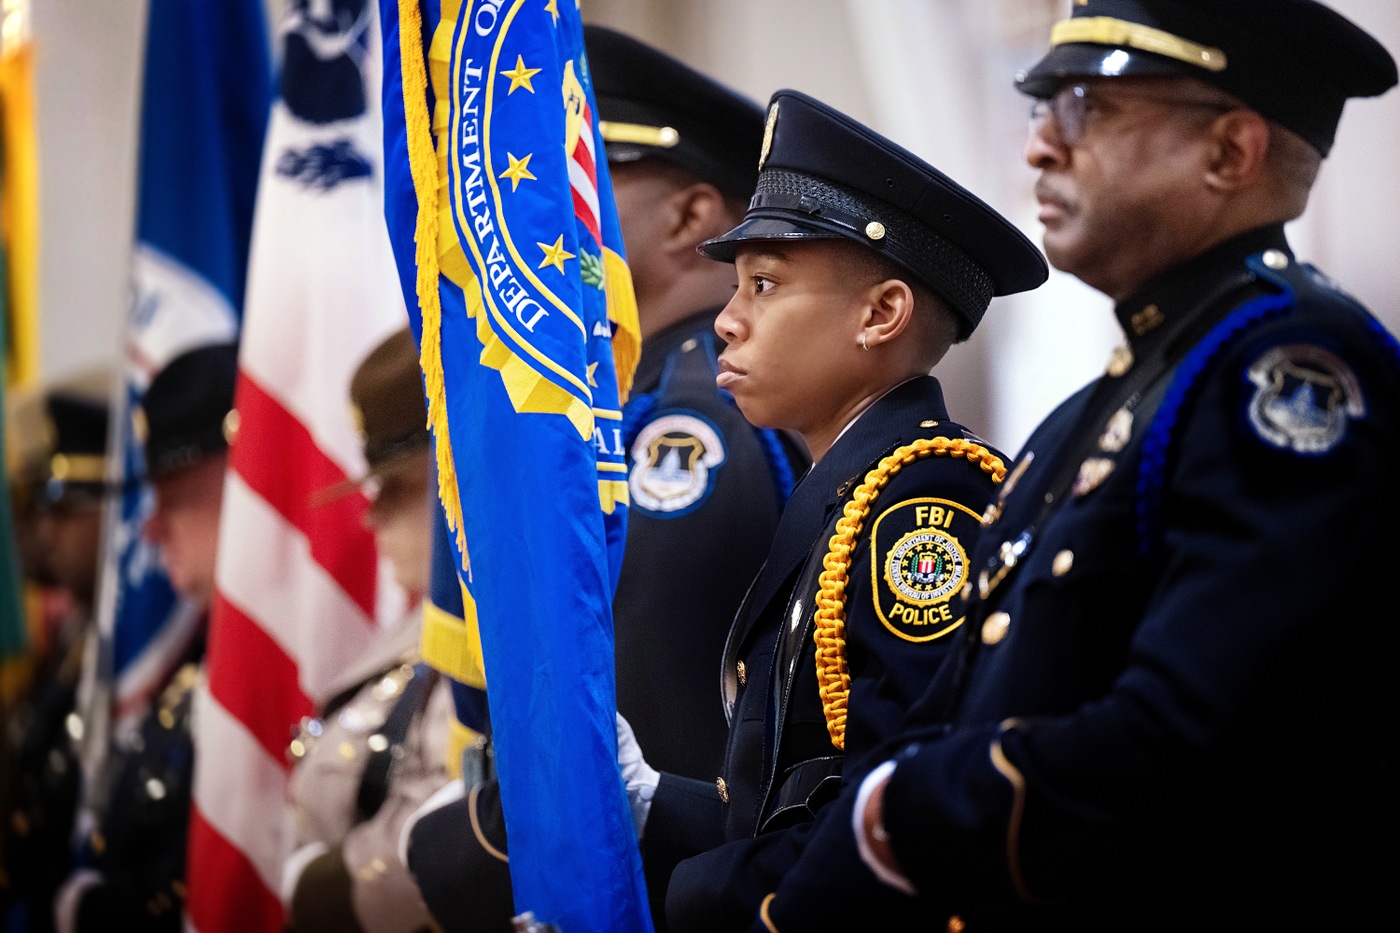 The FBI Police Color Guard during Police Week 2023 observance in Washington, D.C. 